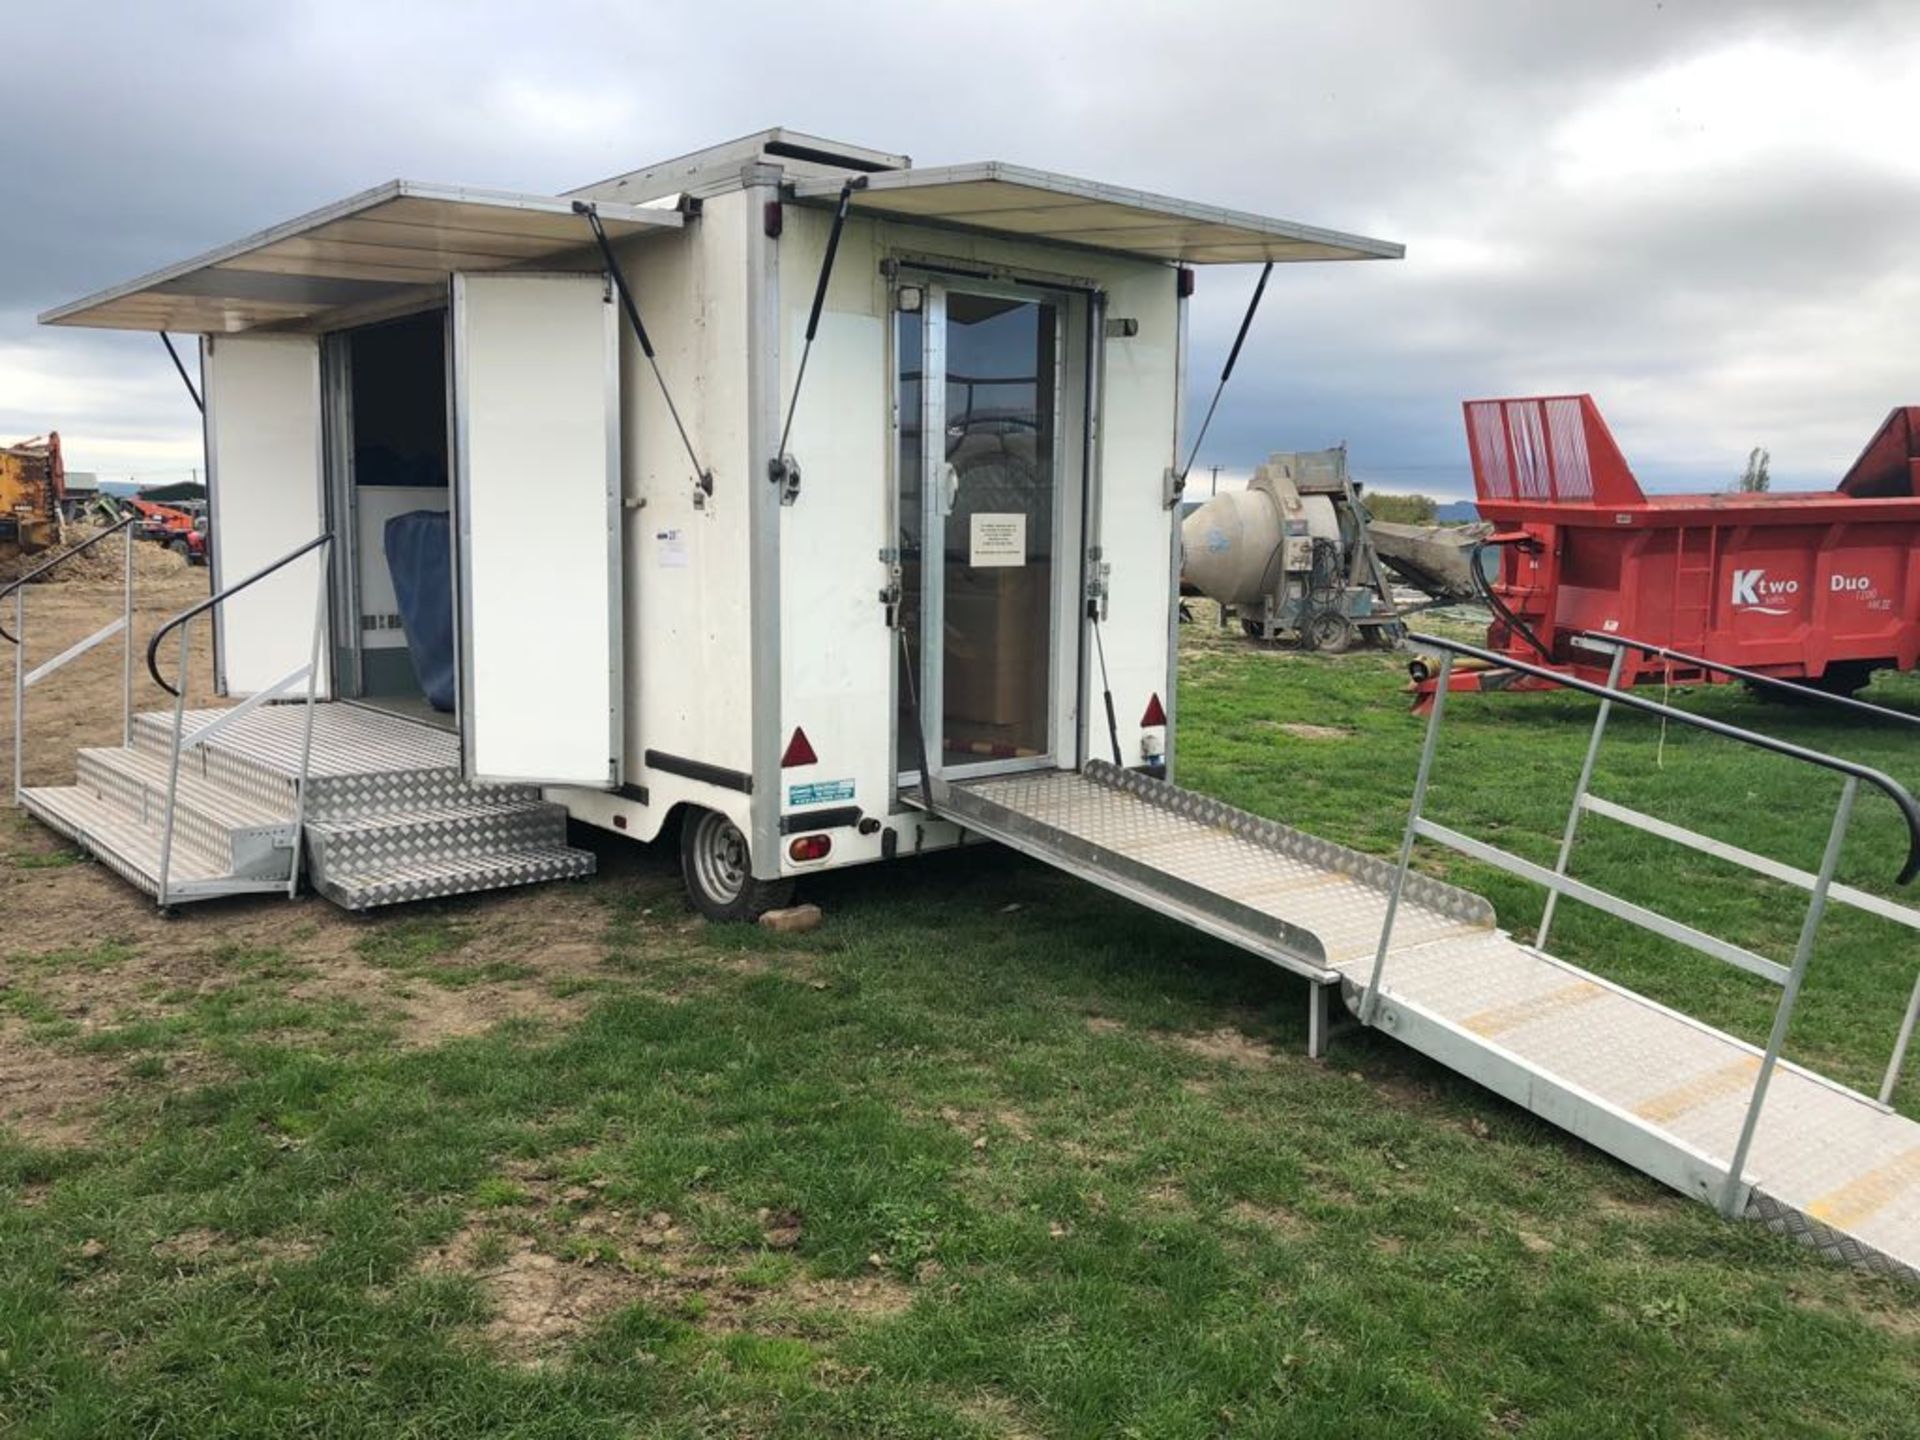 MOBILE OFFICE / EXHIBITION TRAILER C/W RAMPS, STEPS, GENERATOR, MAINS ELECTRIC HOOK UP, KITCHEN ETC